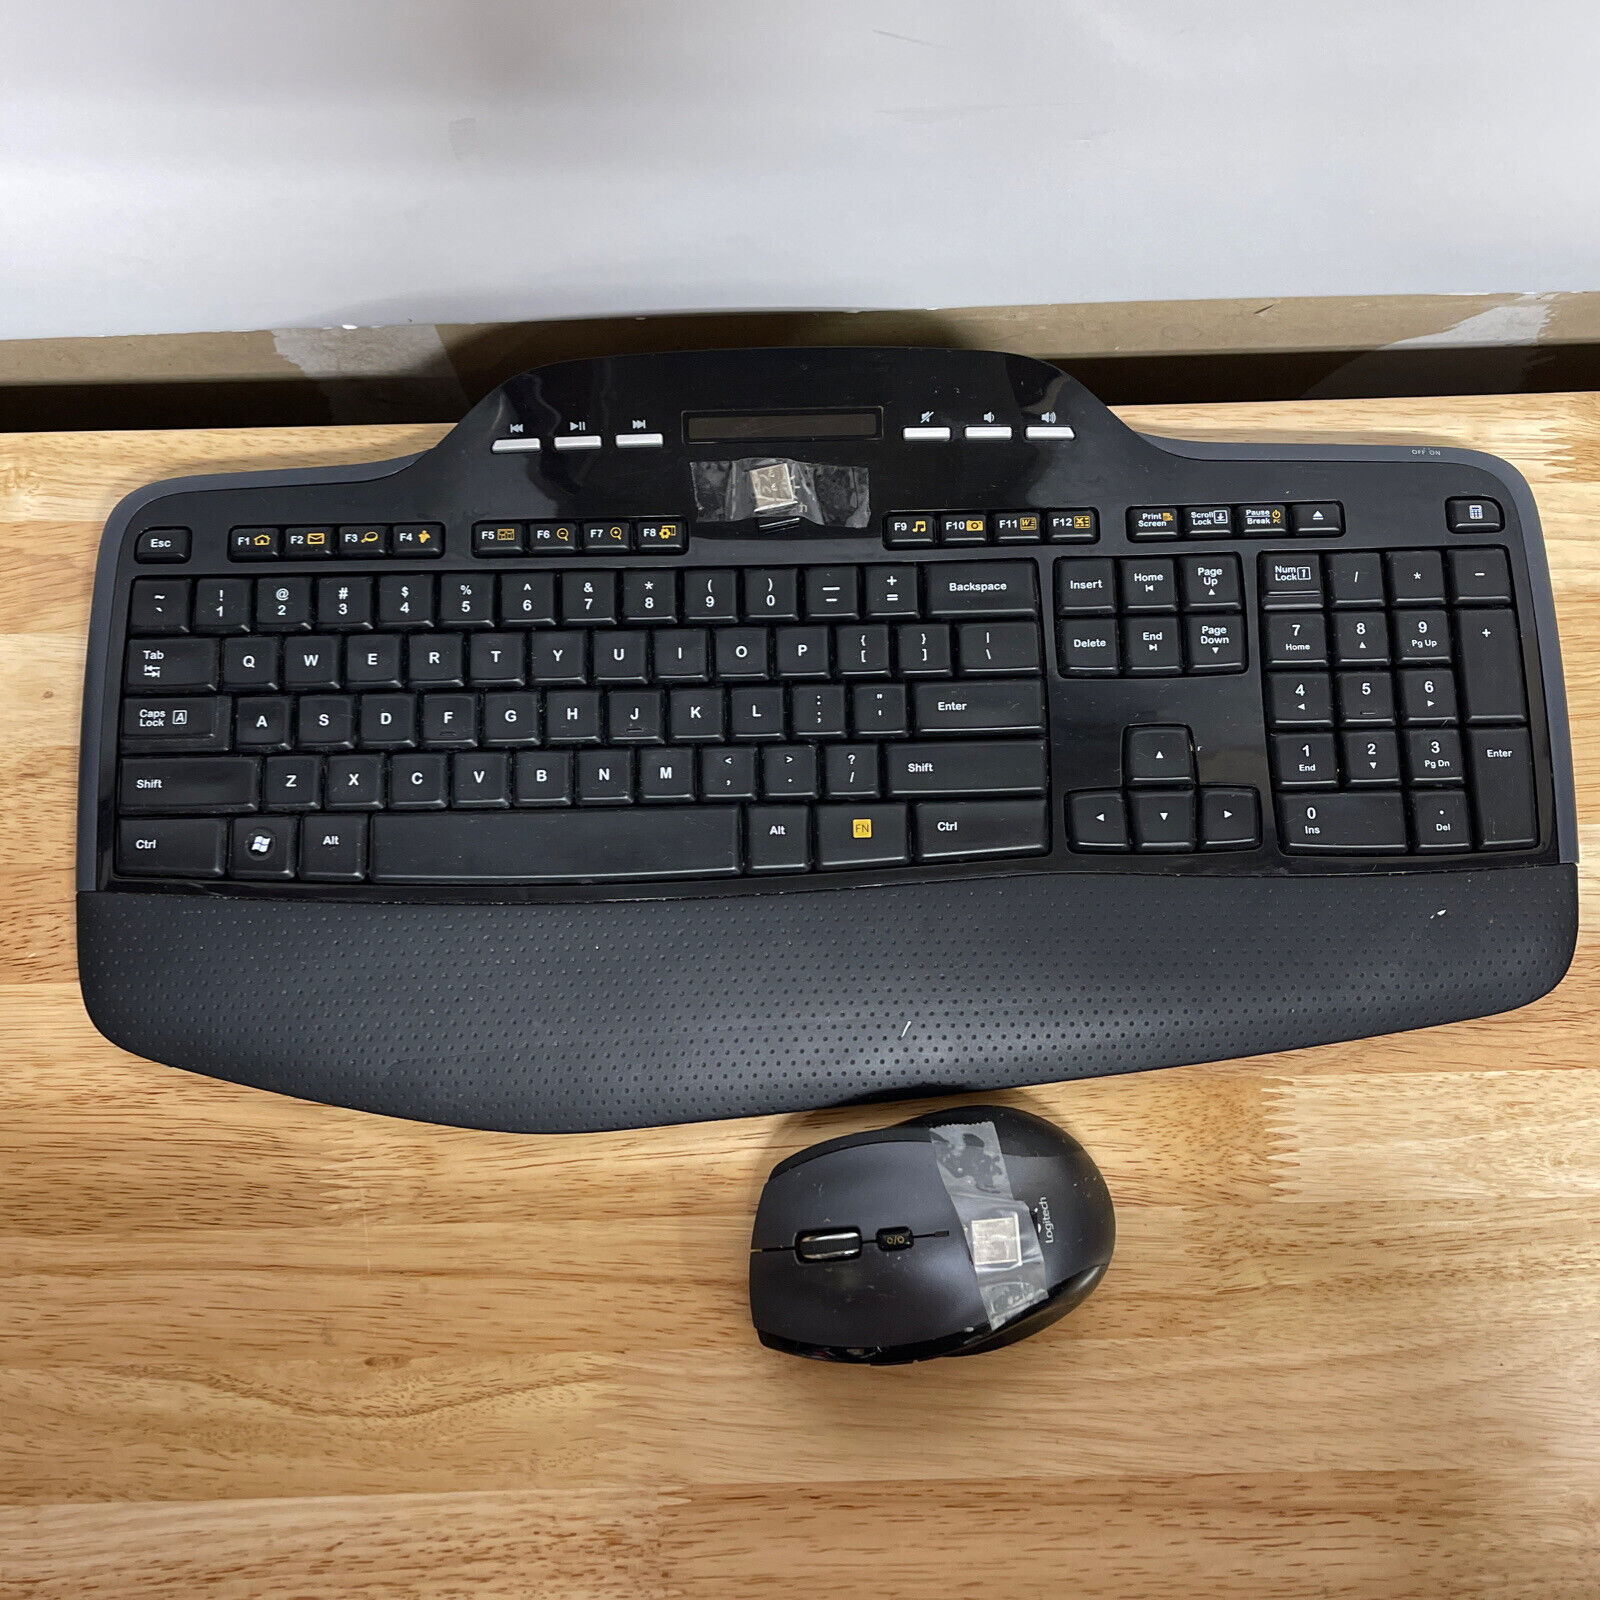 Logitech M705 Mouse MK710 Wireless Keyboard & Mouse Combo with Dongle 2.4 GHz